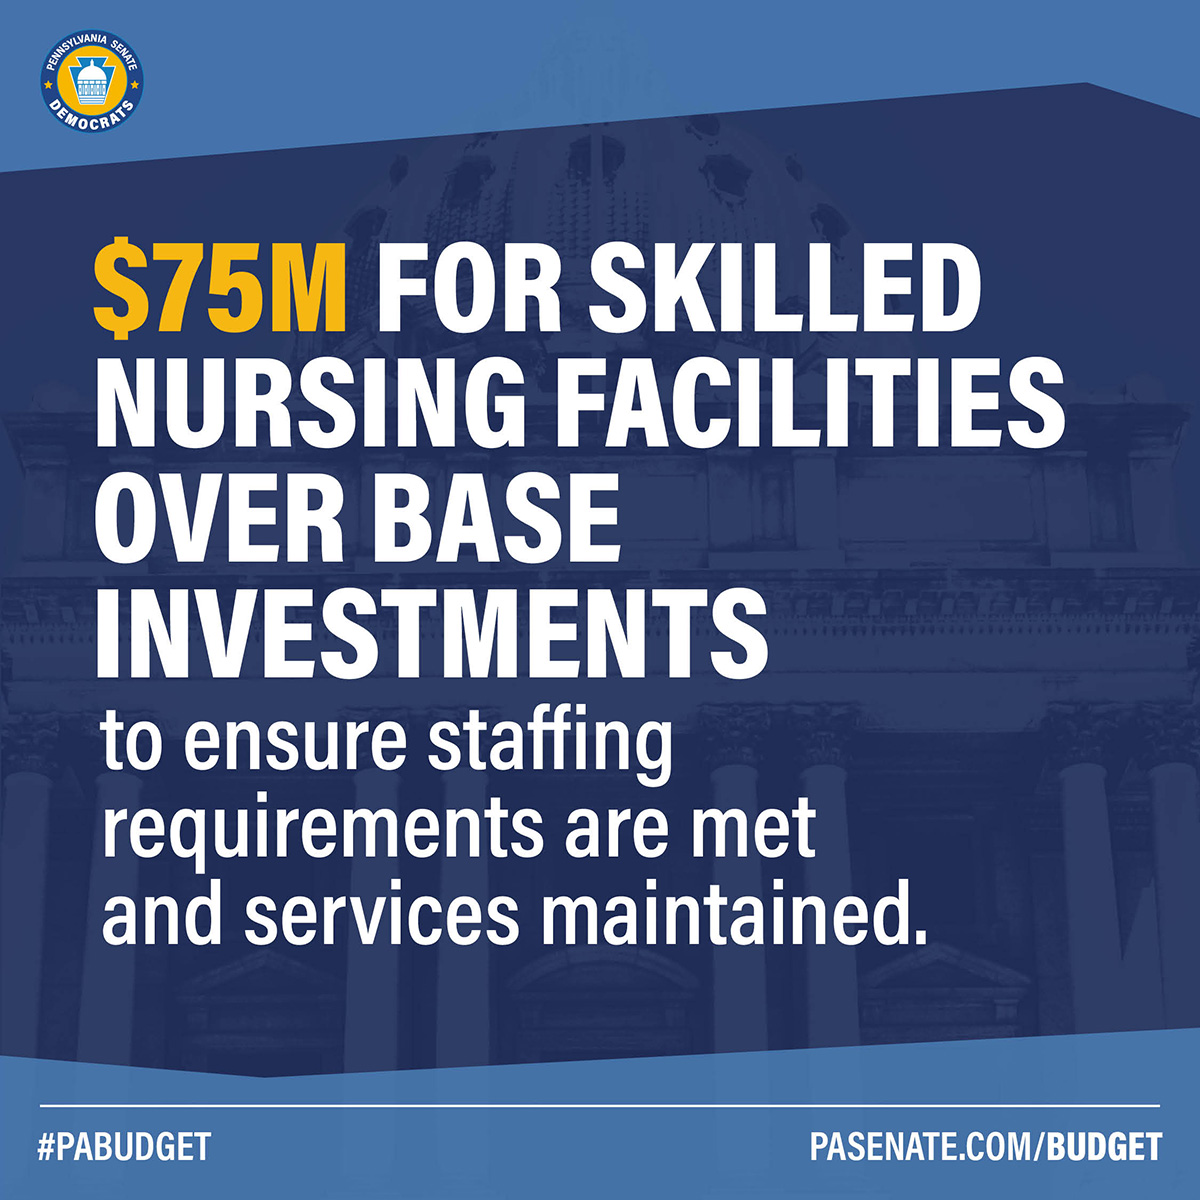 $75M for skilled nursing facilities over base investments to ensure staffing requirements are&lt;br /&gt;met and services maintained